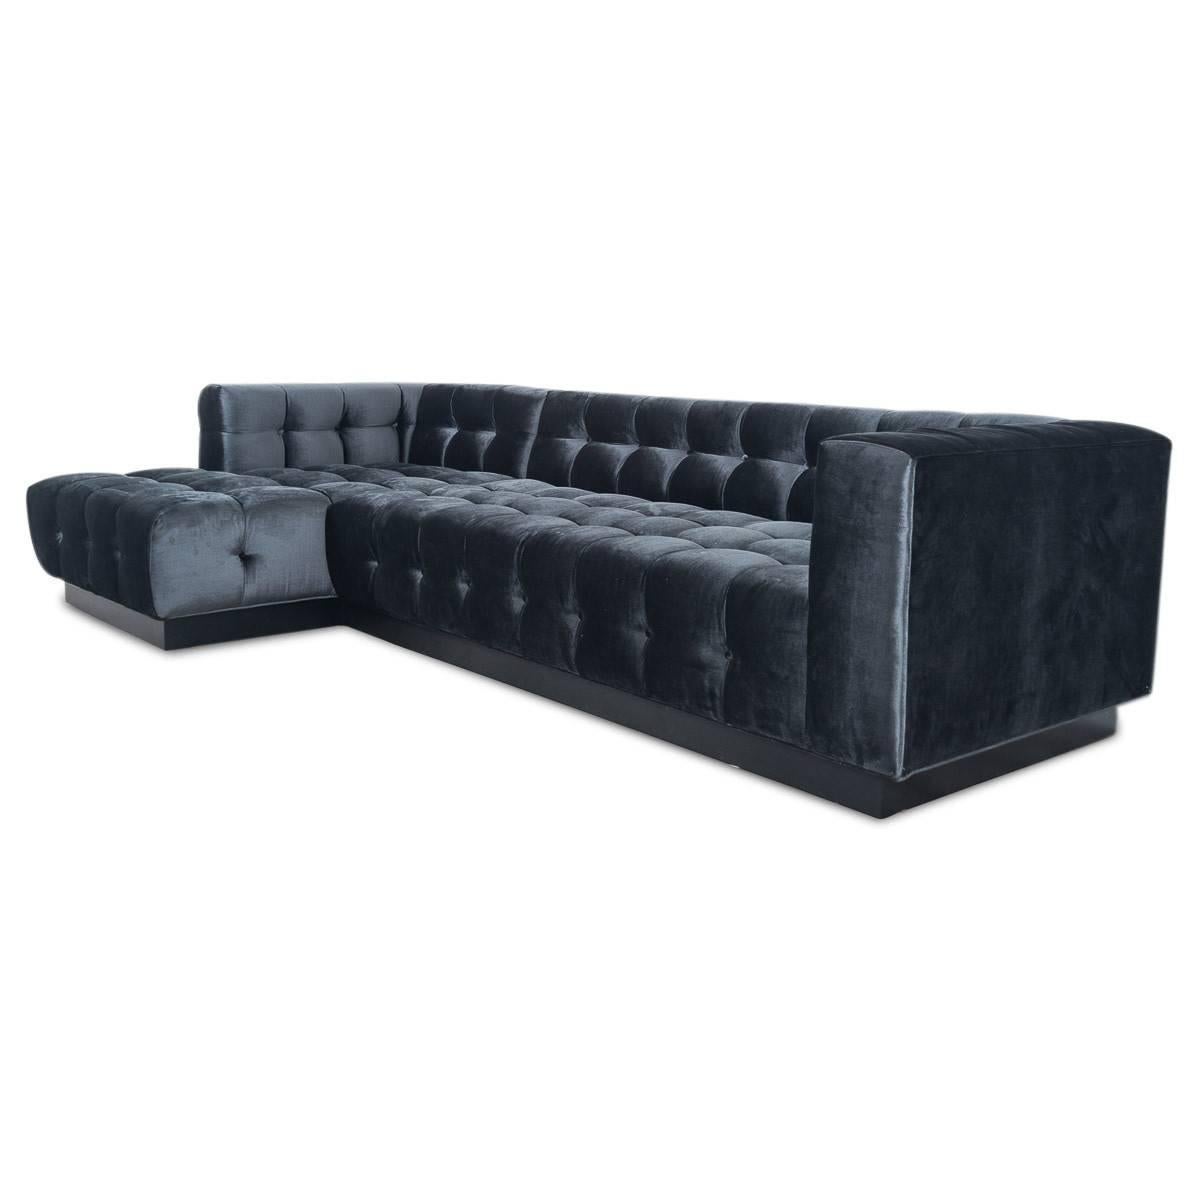 Perfect for wide-open living rooms, this Sectional is great for any modern decor. Trend black velvet texture and tufting gives the piece an elegant look that ensures comfort while the 4